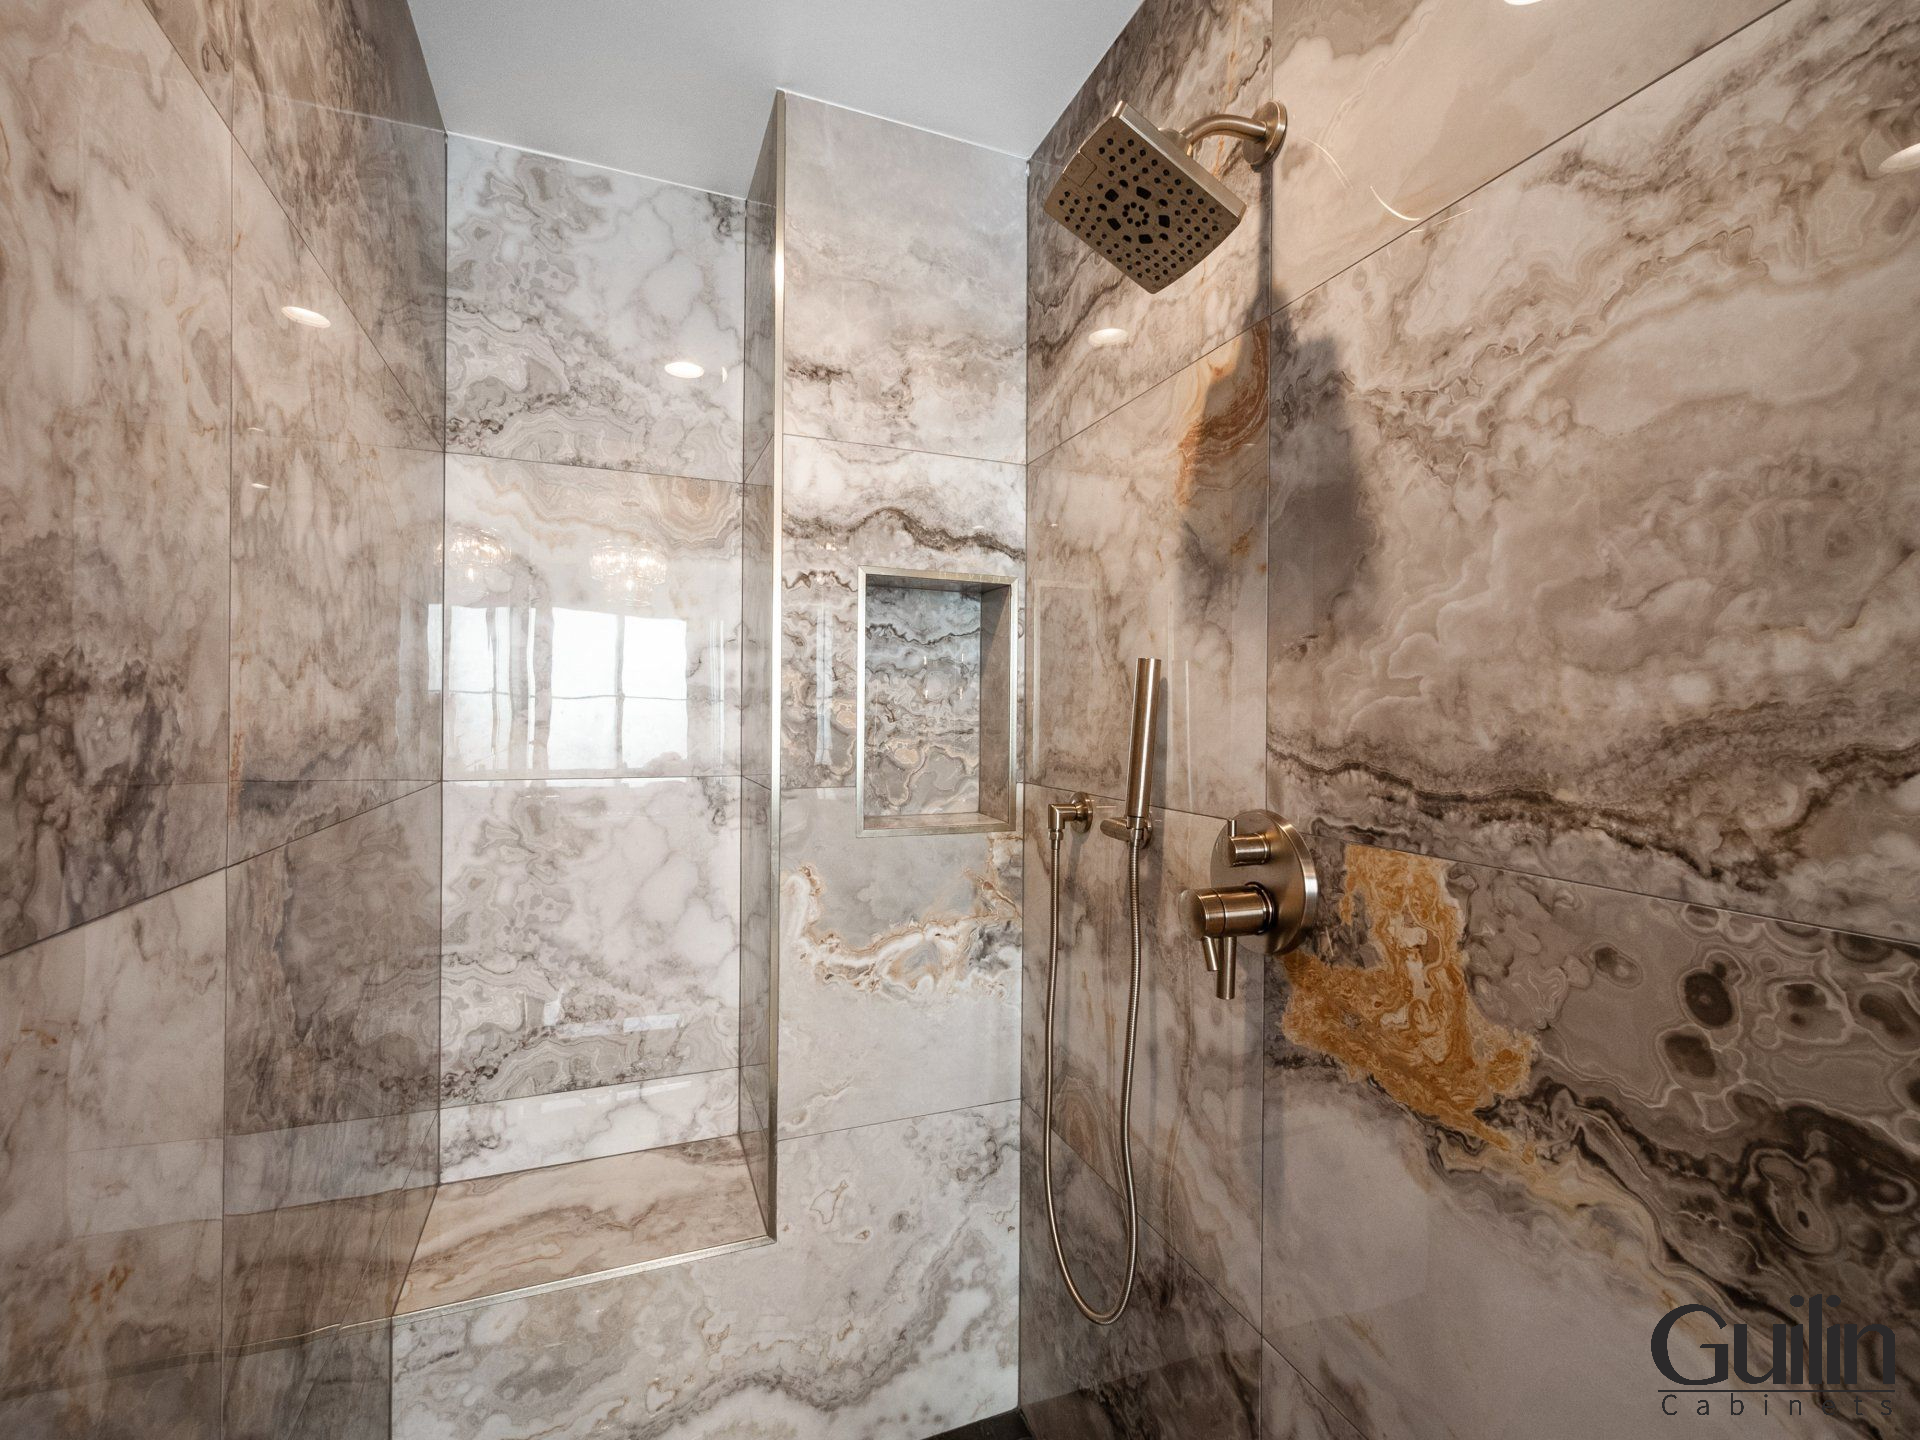 Walk-in shower in Masterbathroom is perfect for those who don't have much time to bathe or want to rinse off quickly